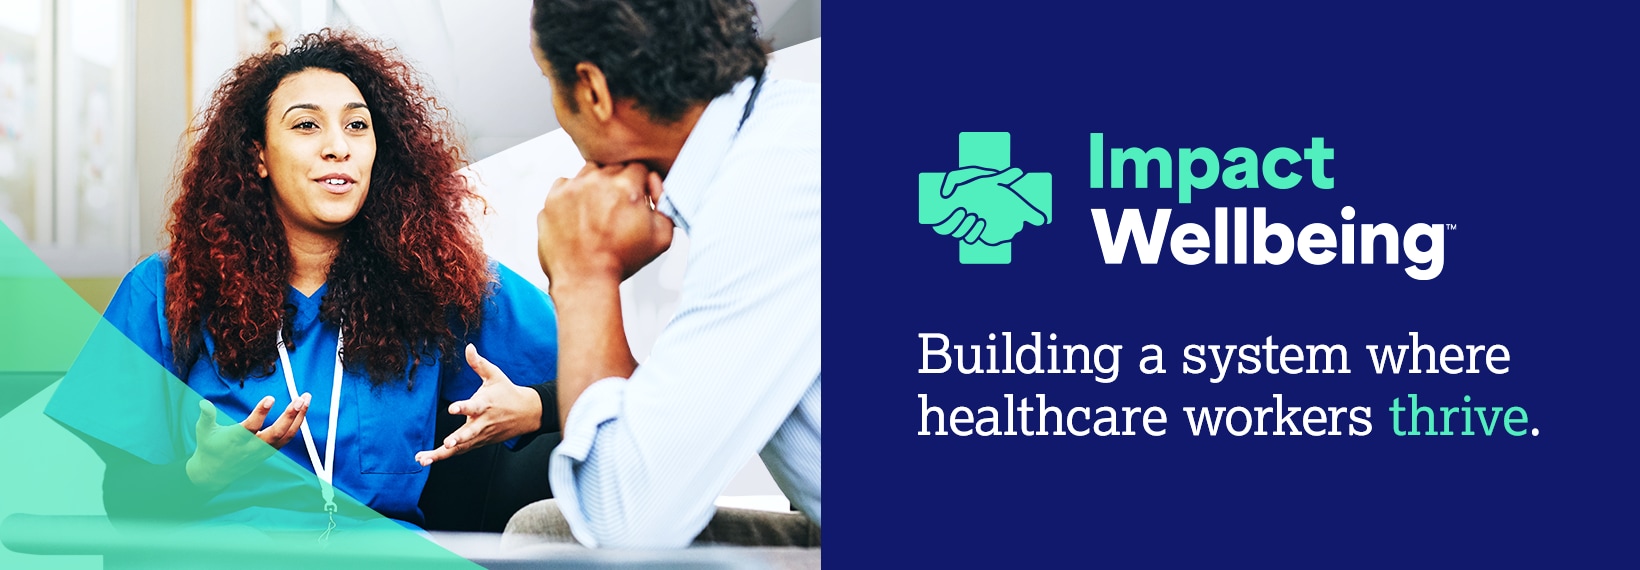 Building a system where healthcare workers thrive